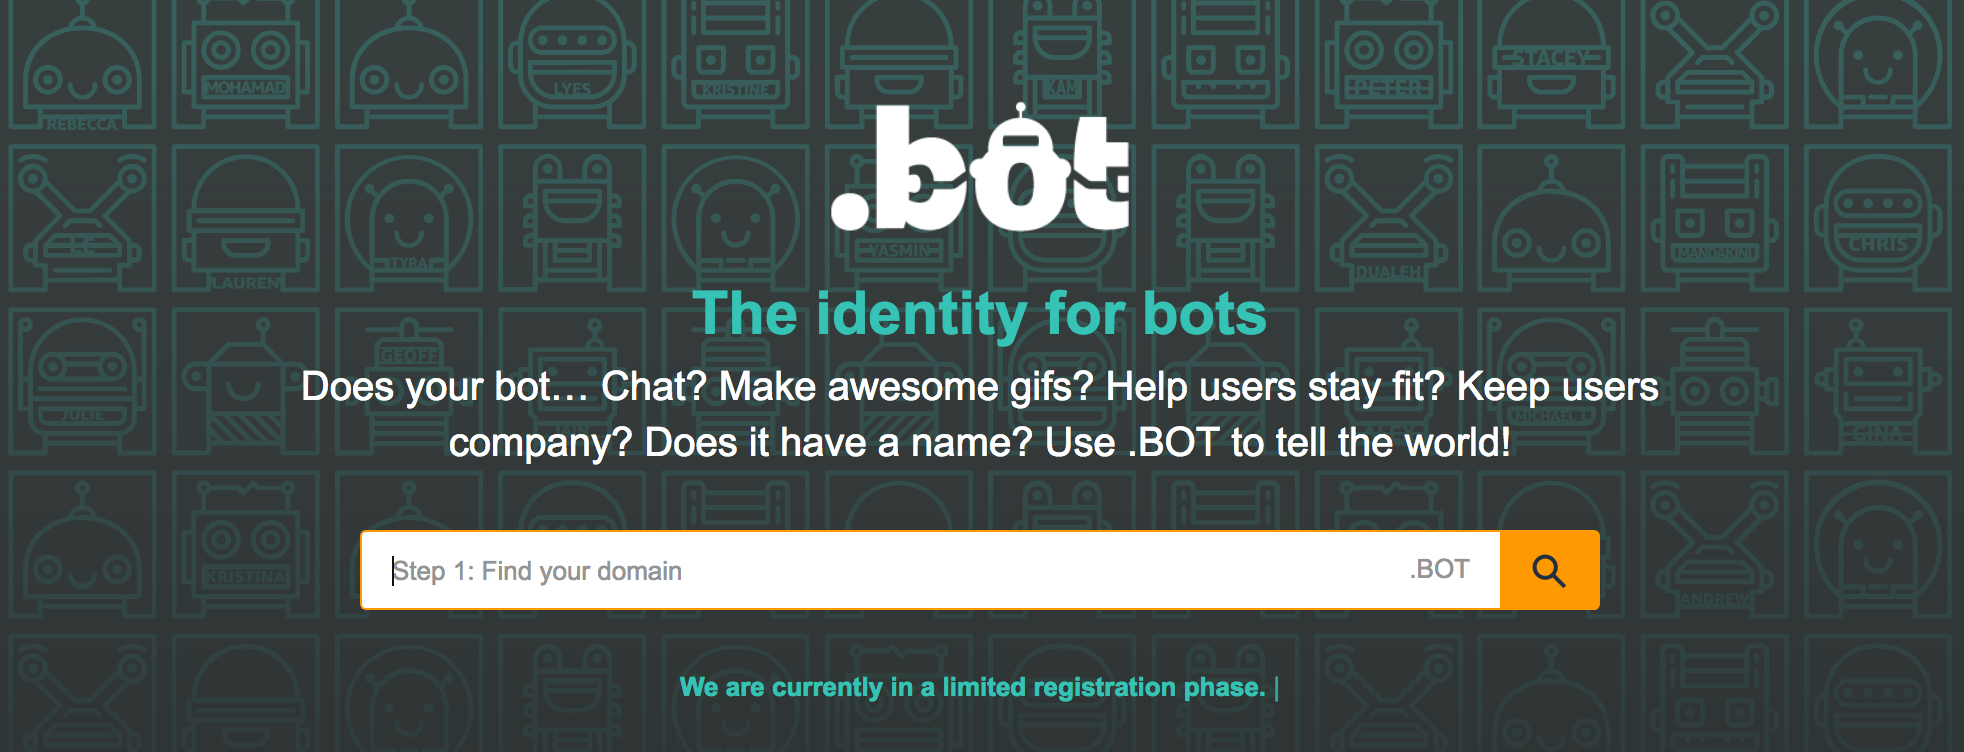 How to Register a .Bot Domain on Amazon and Why Your Business Needs One |  by BotList | BotPublication